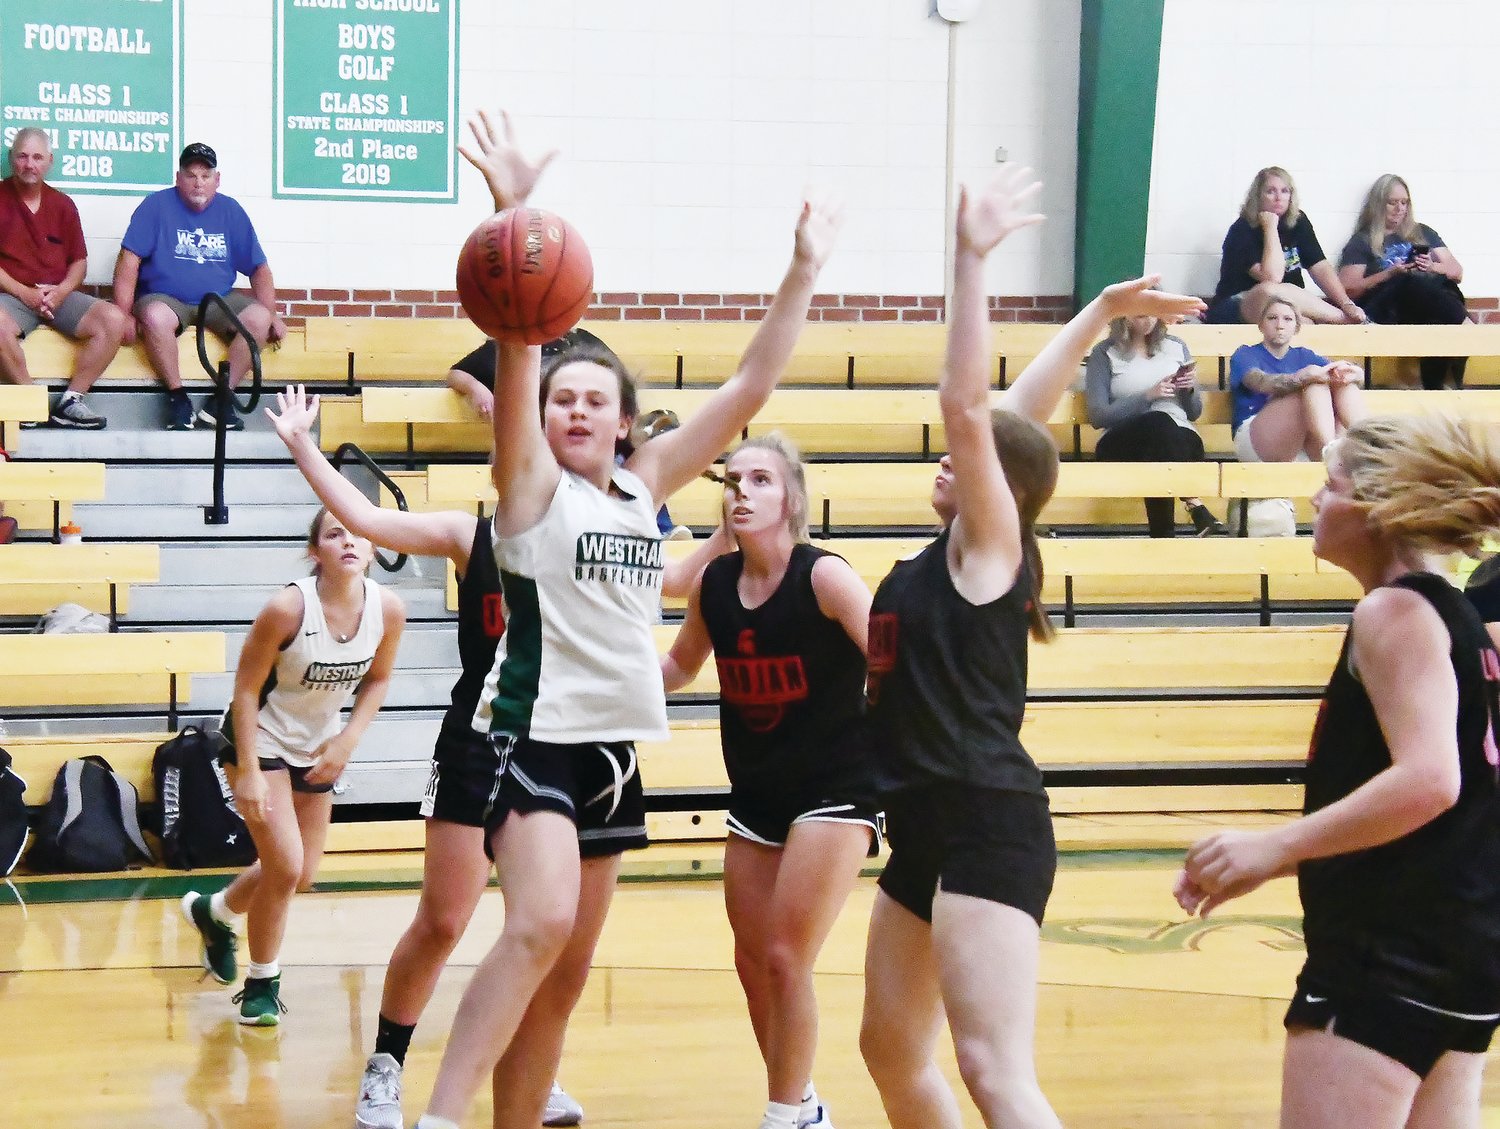 Kate Hollman from Westran was stripped of the ball while driving through the lane during a scrimmage versus Community R-VI.